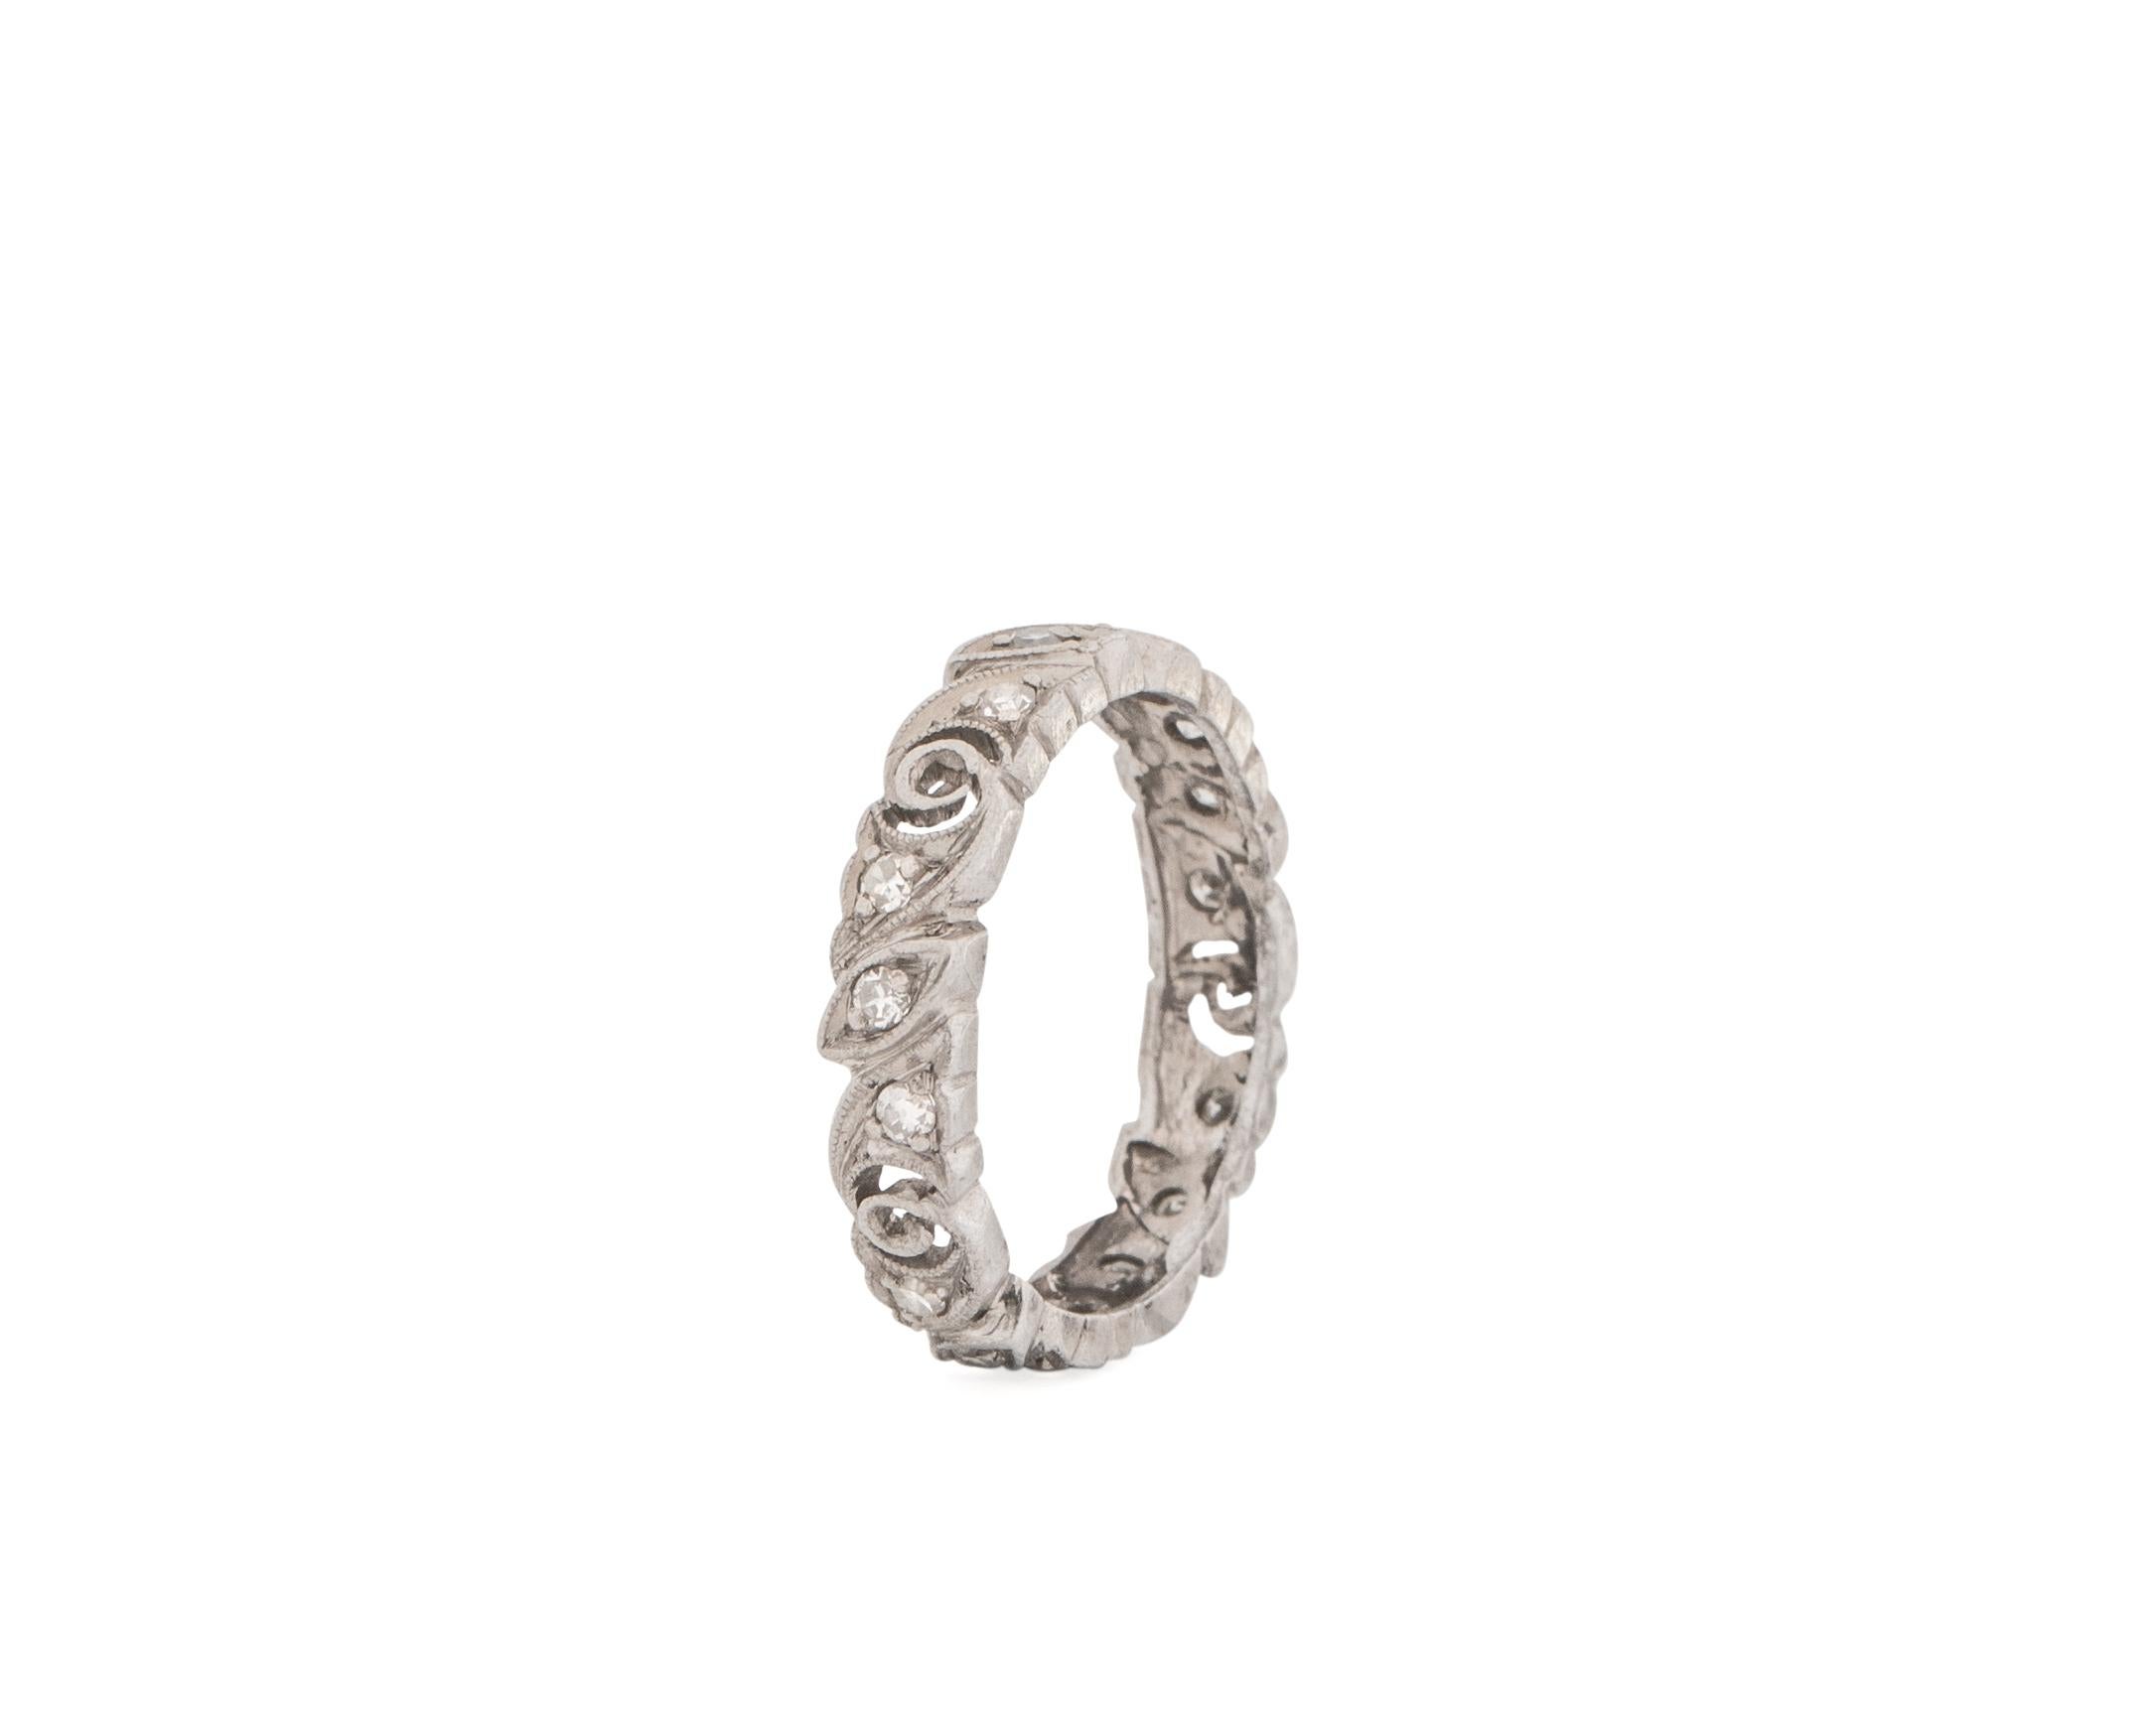 Item Details:
Metal type: 14 Karat White Gold & Platinum (prongs)
Weight: 4.3 grams
Size 6 (not resizable)

Diamond Details:
Cut: Single Cut
Carat: .3 Carat Total
Color: G
Clarity: VS

This ring features a beautiful intricate hand carved pierced